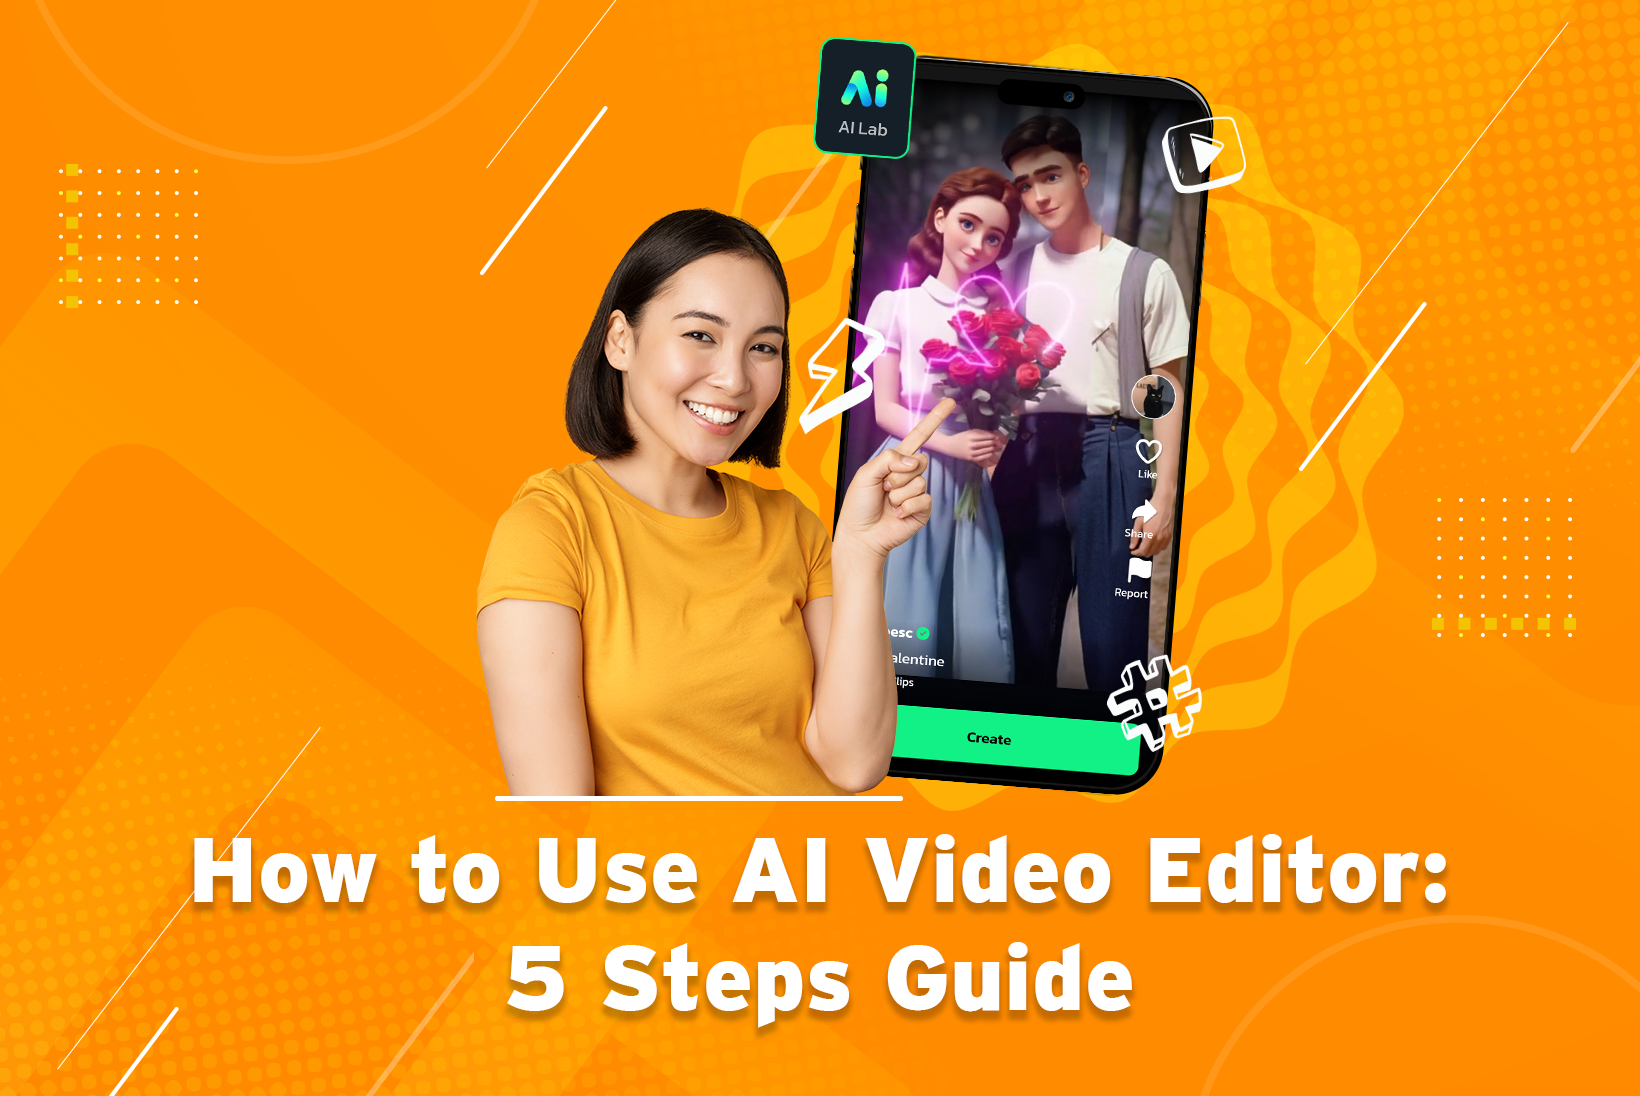 How to Use AI Video Editor